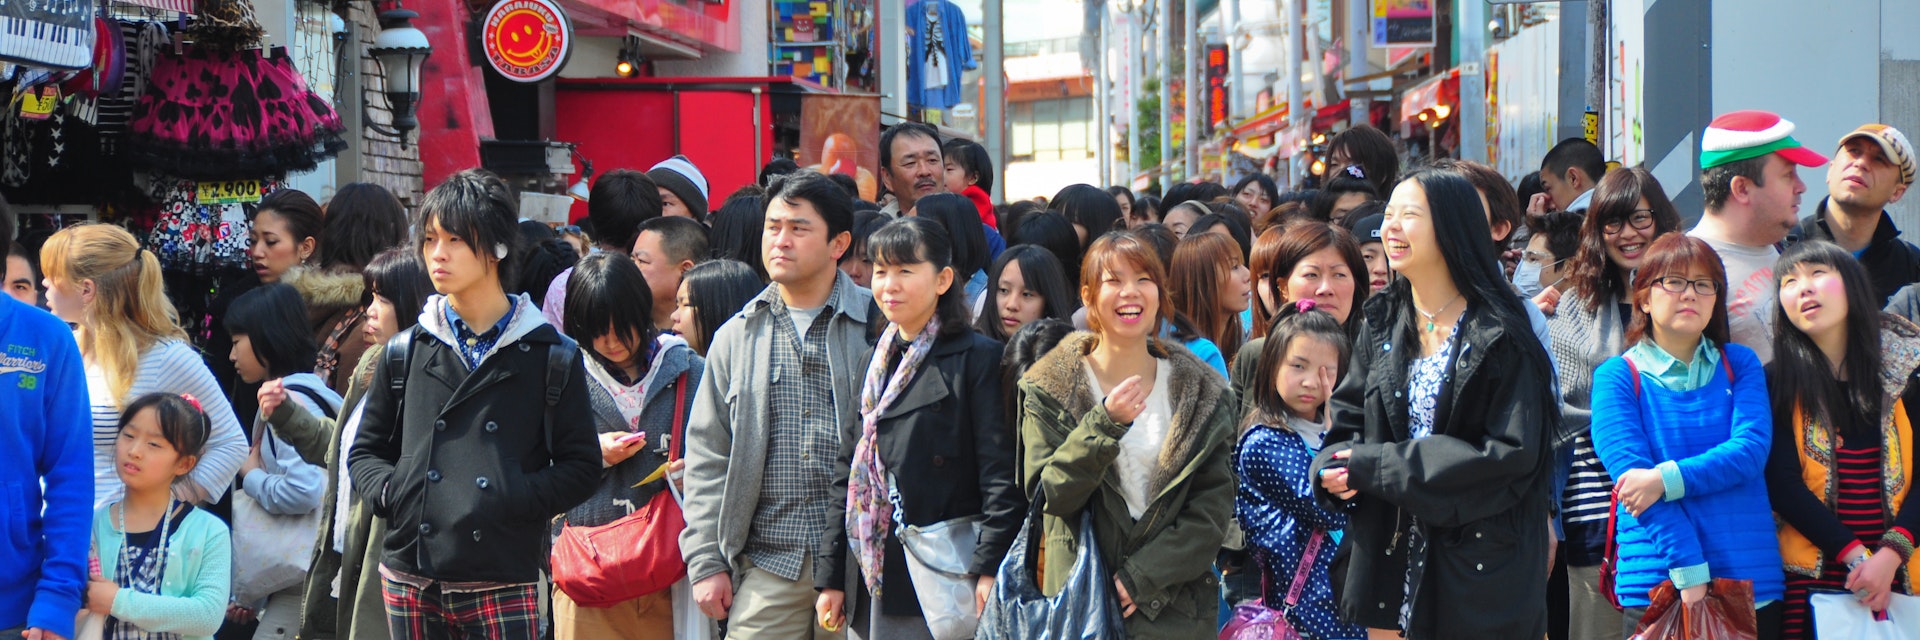 TOKYO - APRIL 1 2012: People, mostly youngsters, walk through Takeshita Dori near Harajuku train station on Sunday April 1 2012. Takeshita Dori is considered a birthplace of Japan's fashion trends.; Shutterstock ID 113994796; Your name (First / Last): Josh Vogel; Project no. or GL code: 56530; Network activity no. or Cost Centre: Online-Design; Product or Project: 65050/7529/Josh Vogel/LP.com Destination Galleries